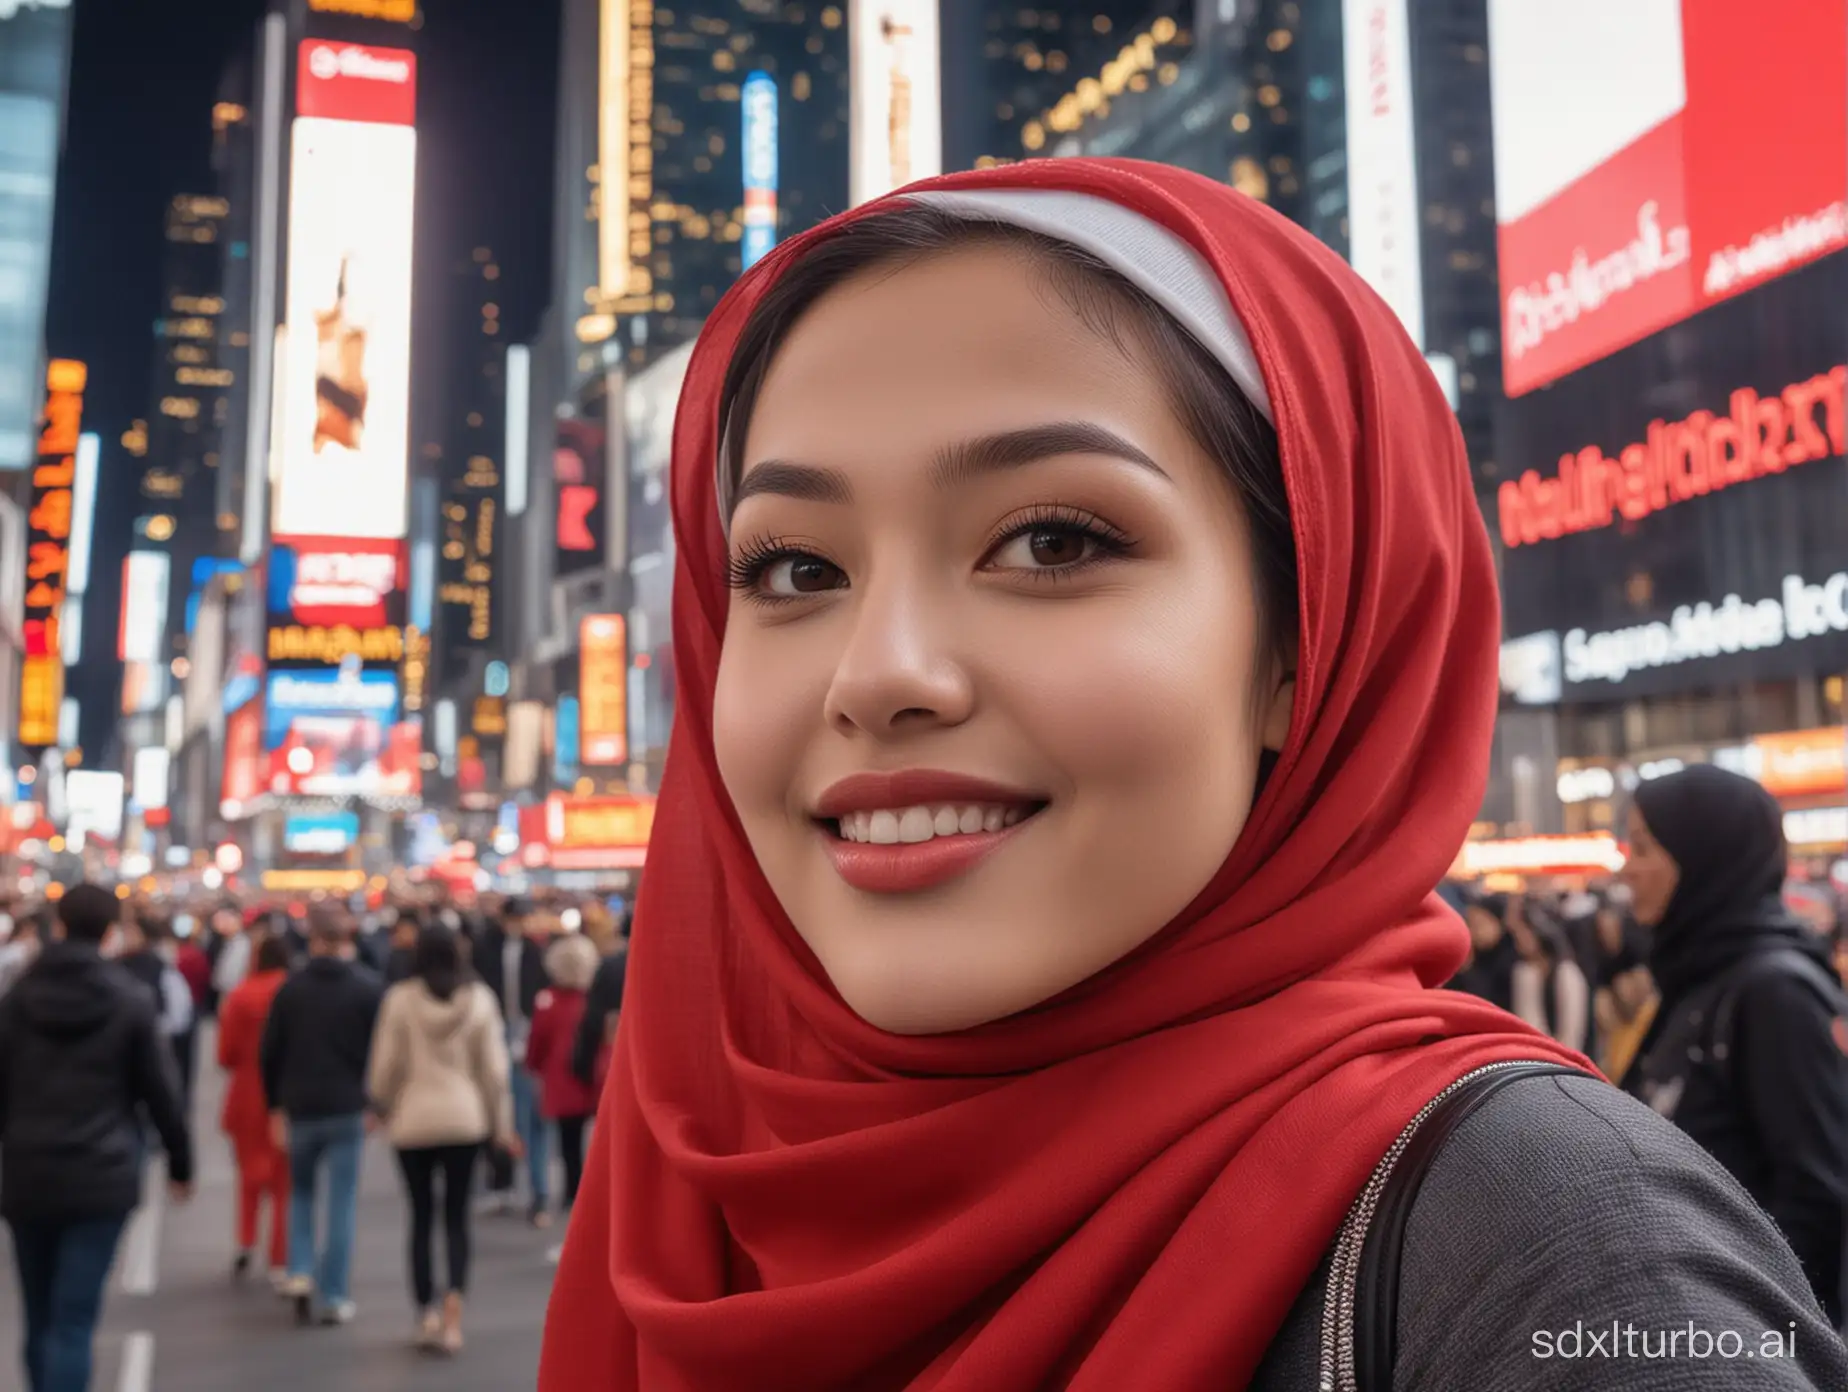 A stunning beautiful charming thailand girl in the middle of New York time square with a smile on her face coz she is wearing a red hijab, bright white skin face, thin lips